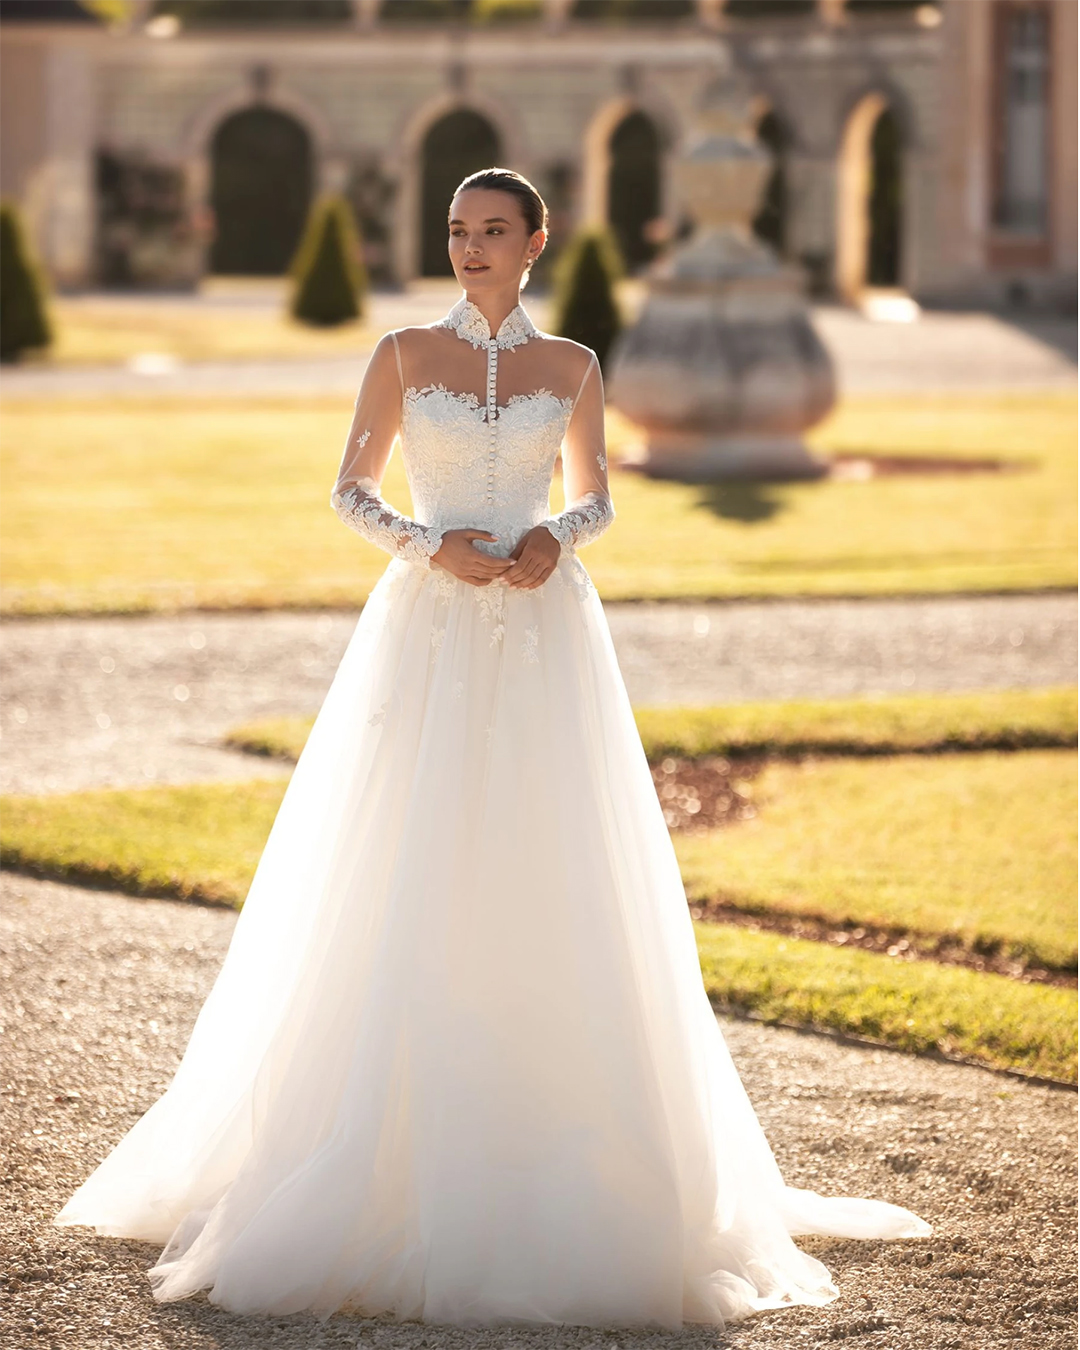 sweetheart neckline wedding dress with illusion long sleeves lace daria karlozi